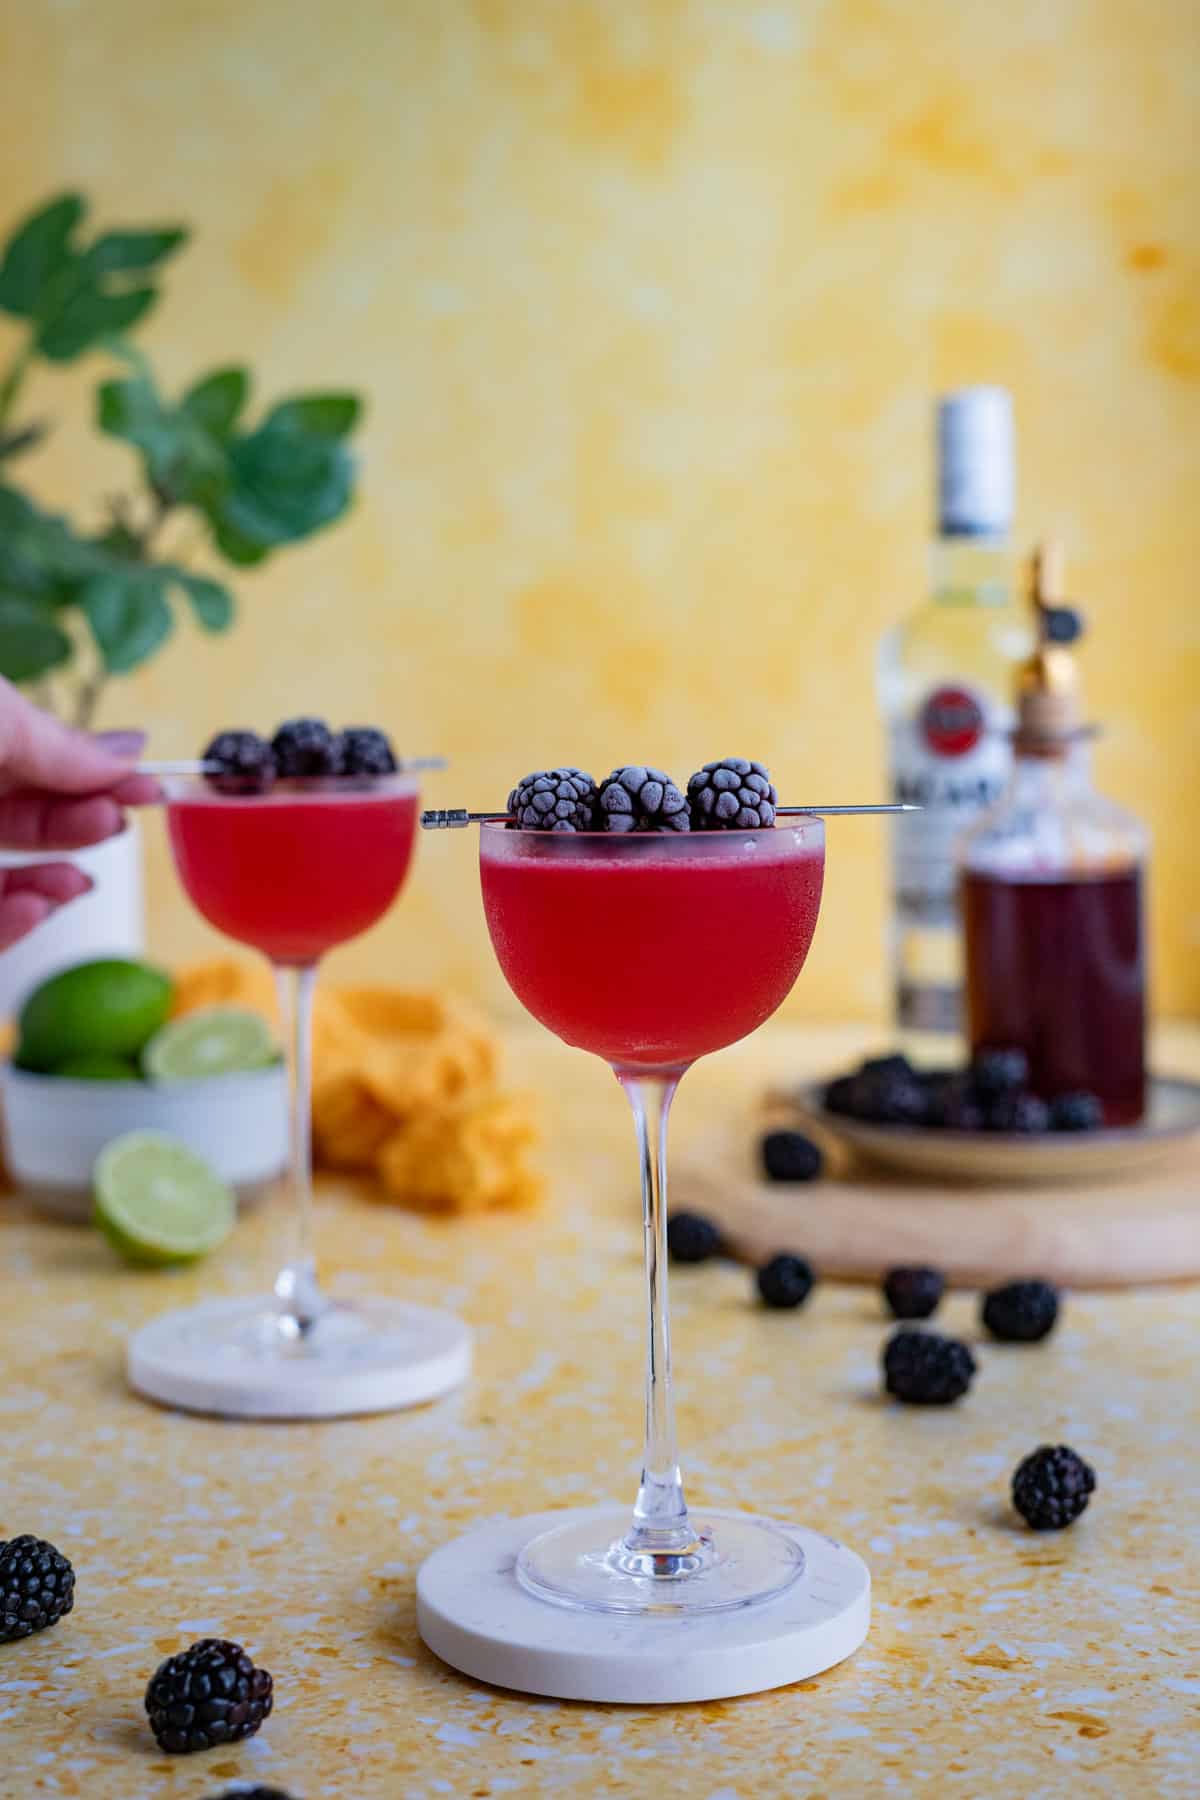 Two blackberry daiquiri cocktails sit on a yellow terrazzo countertop on coasters ready to be served. A hand from out of frame is garnishing one daiquiri with a cocktail pick of frozen blackberries.